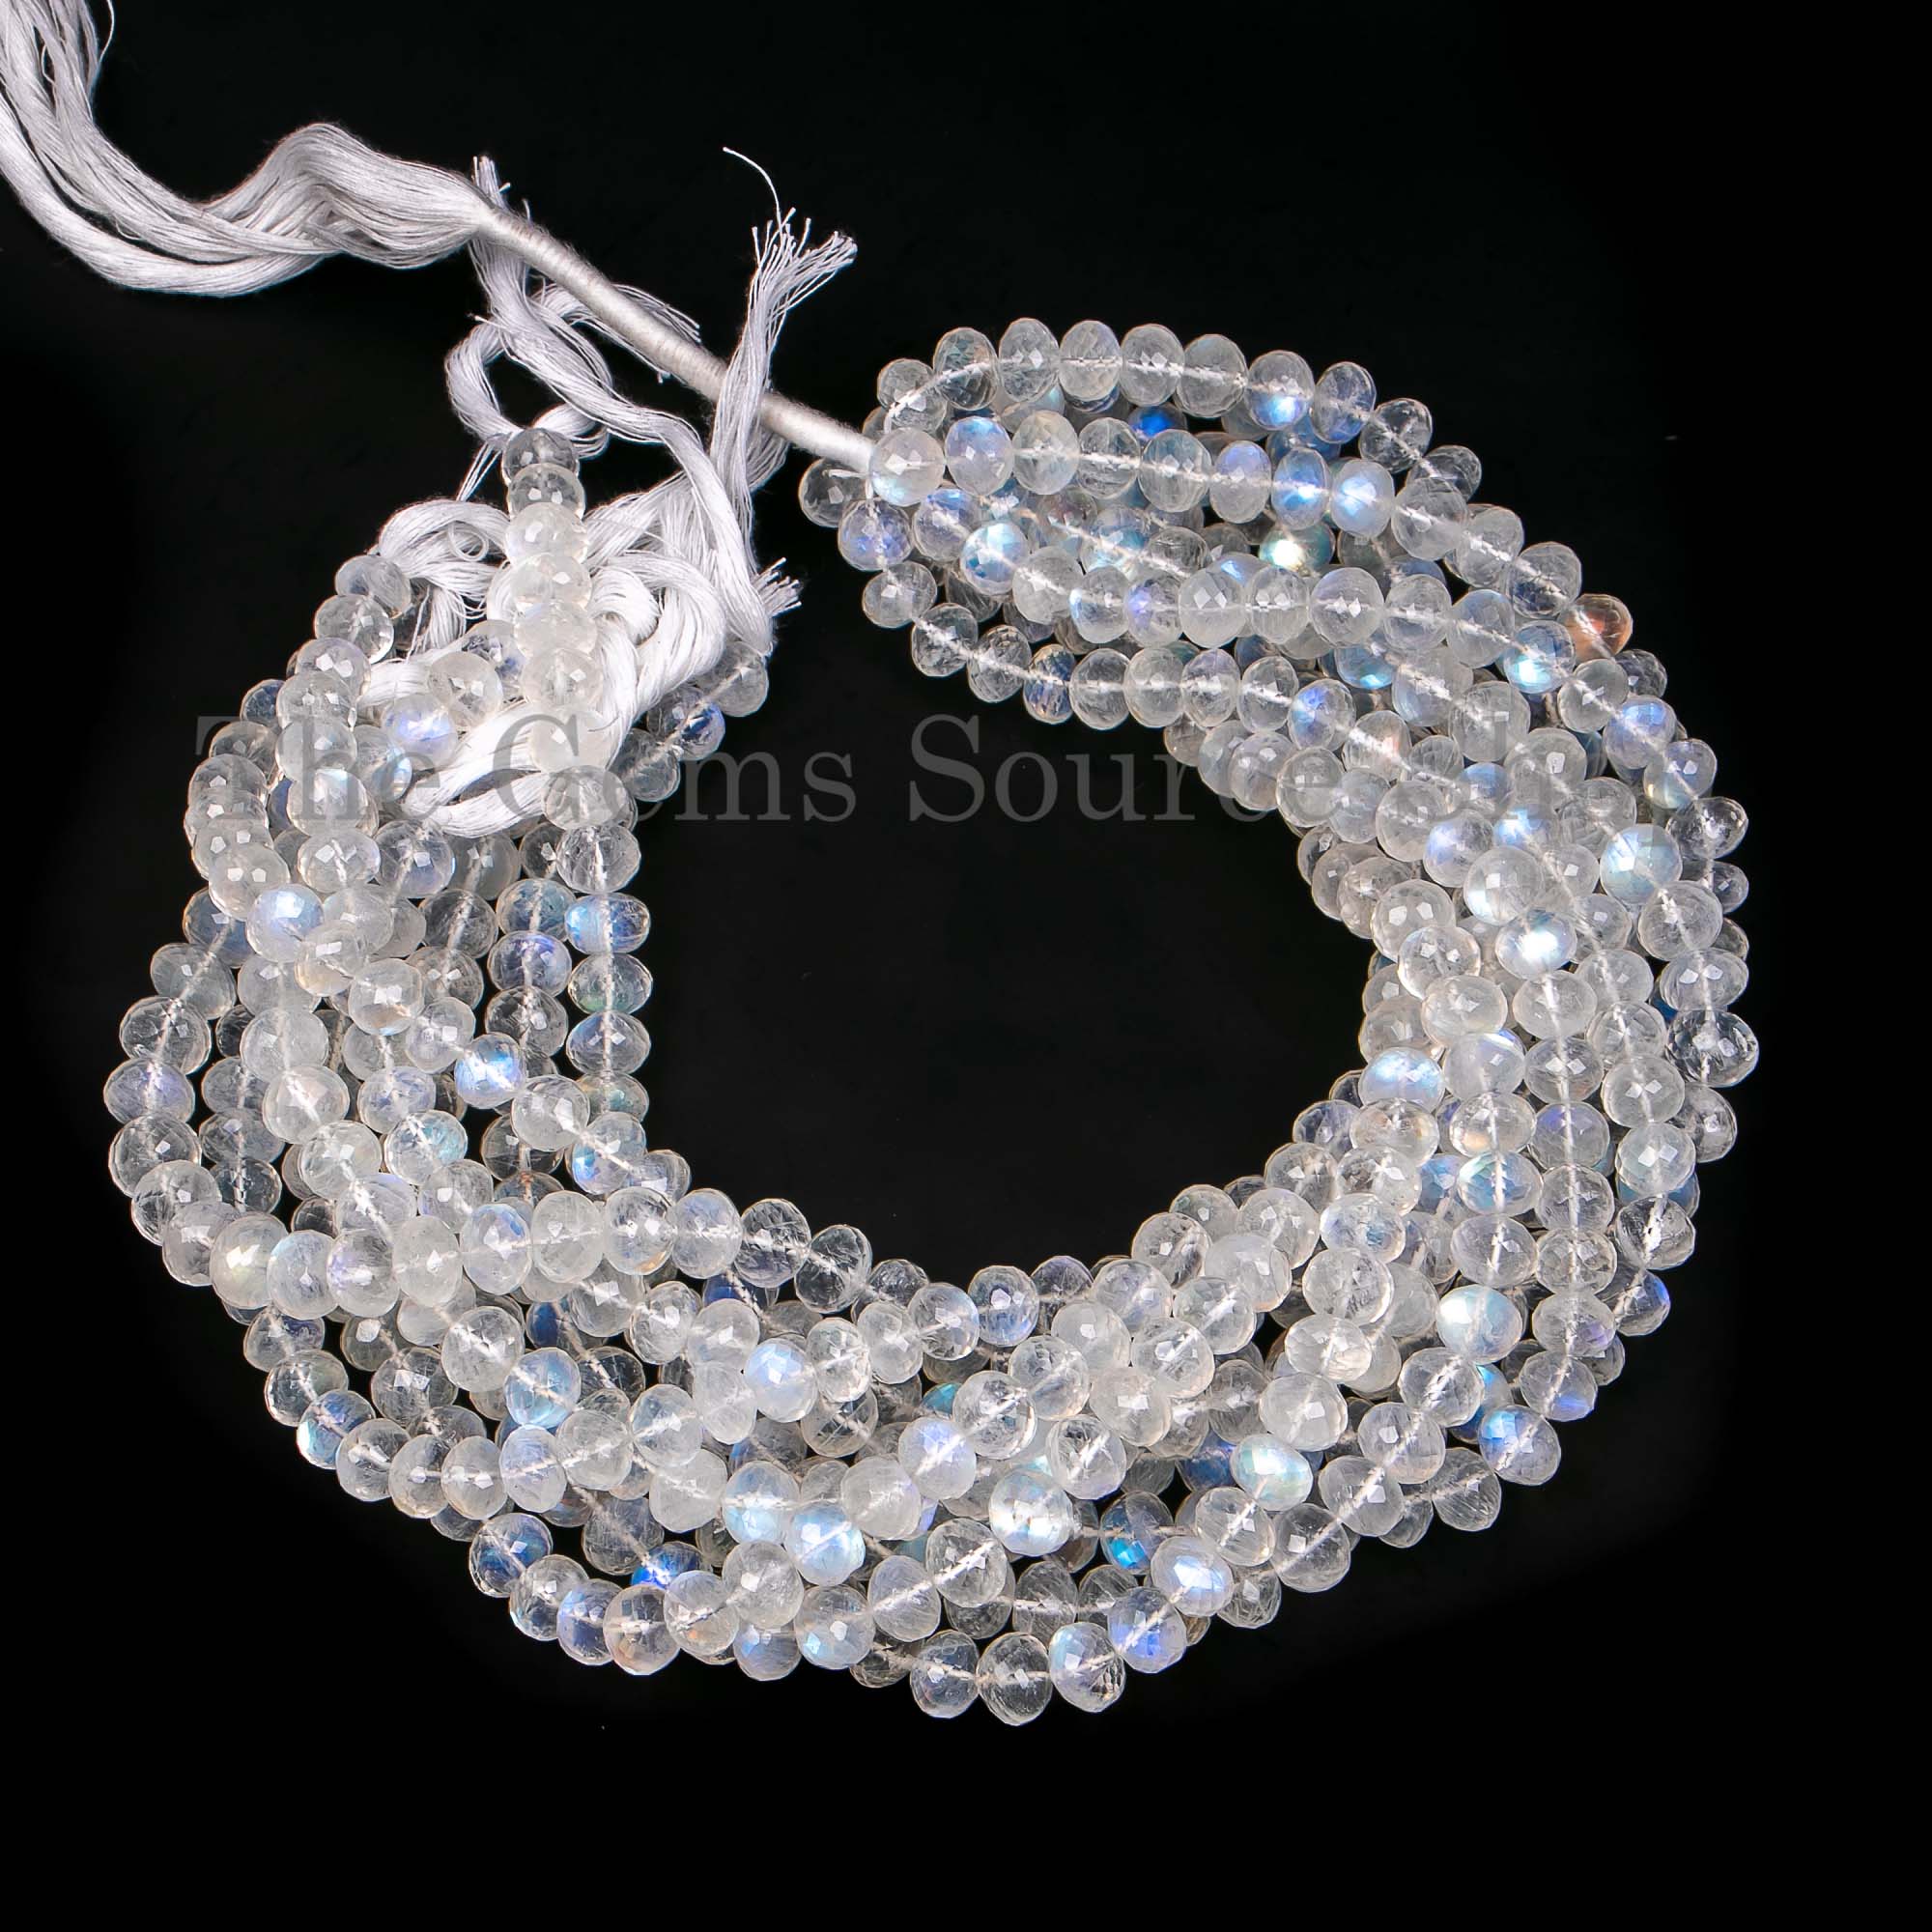 8-8.5mm Natural Rainbow Moonstone Faceted Rondelle Shape Beads, Moonstone Beads